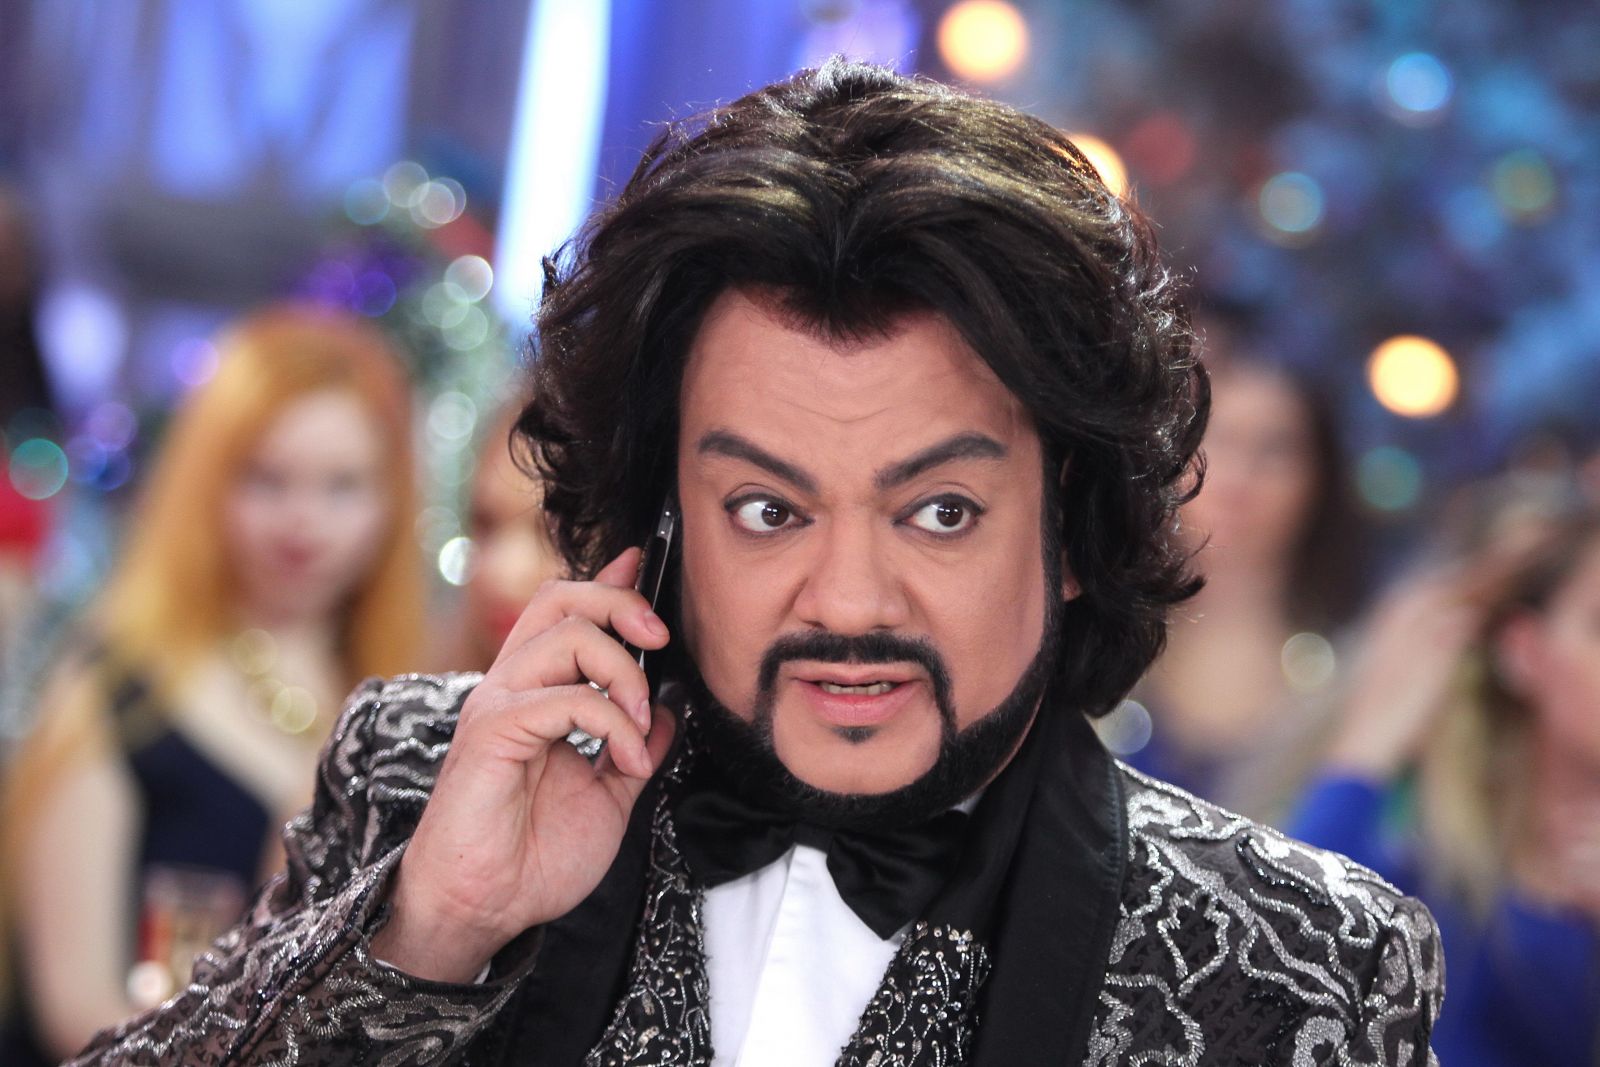 Philip Kirkorov is suing a construction company that scammed him of millions of rubles